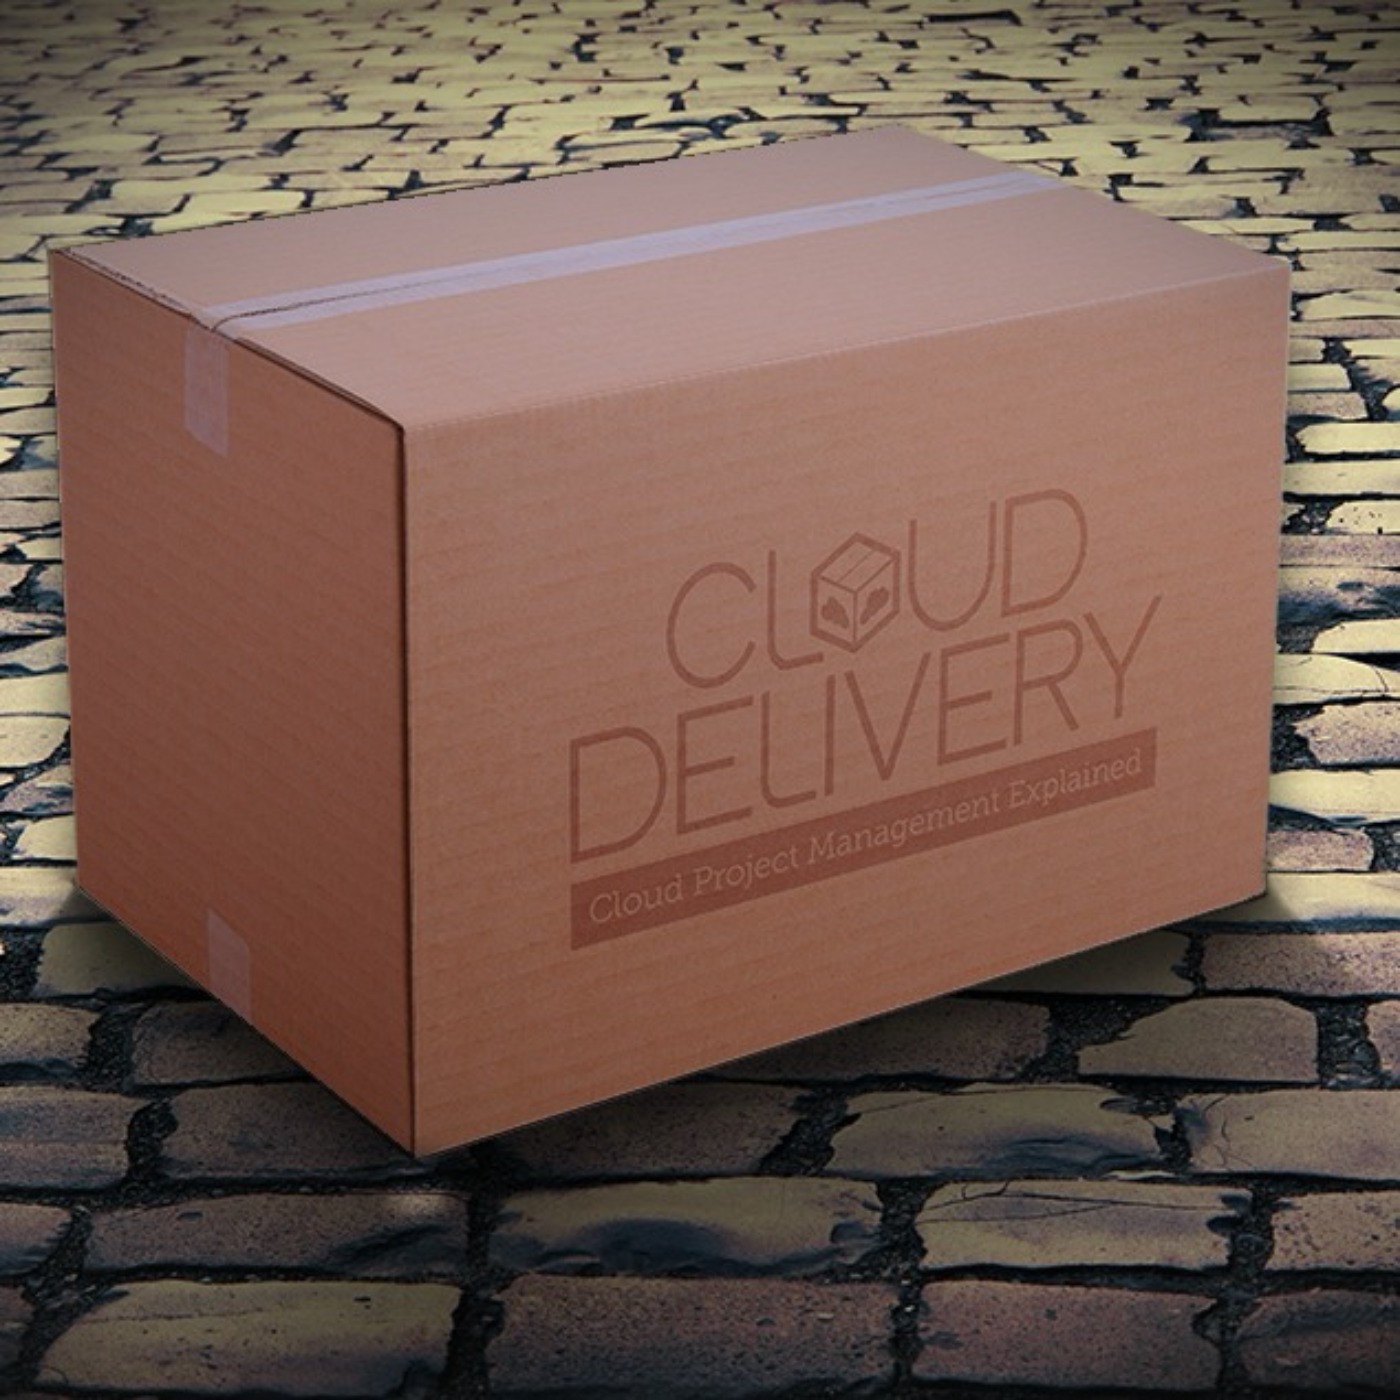 Cloud Delivery